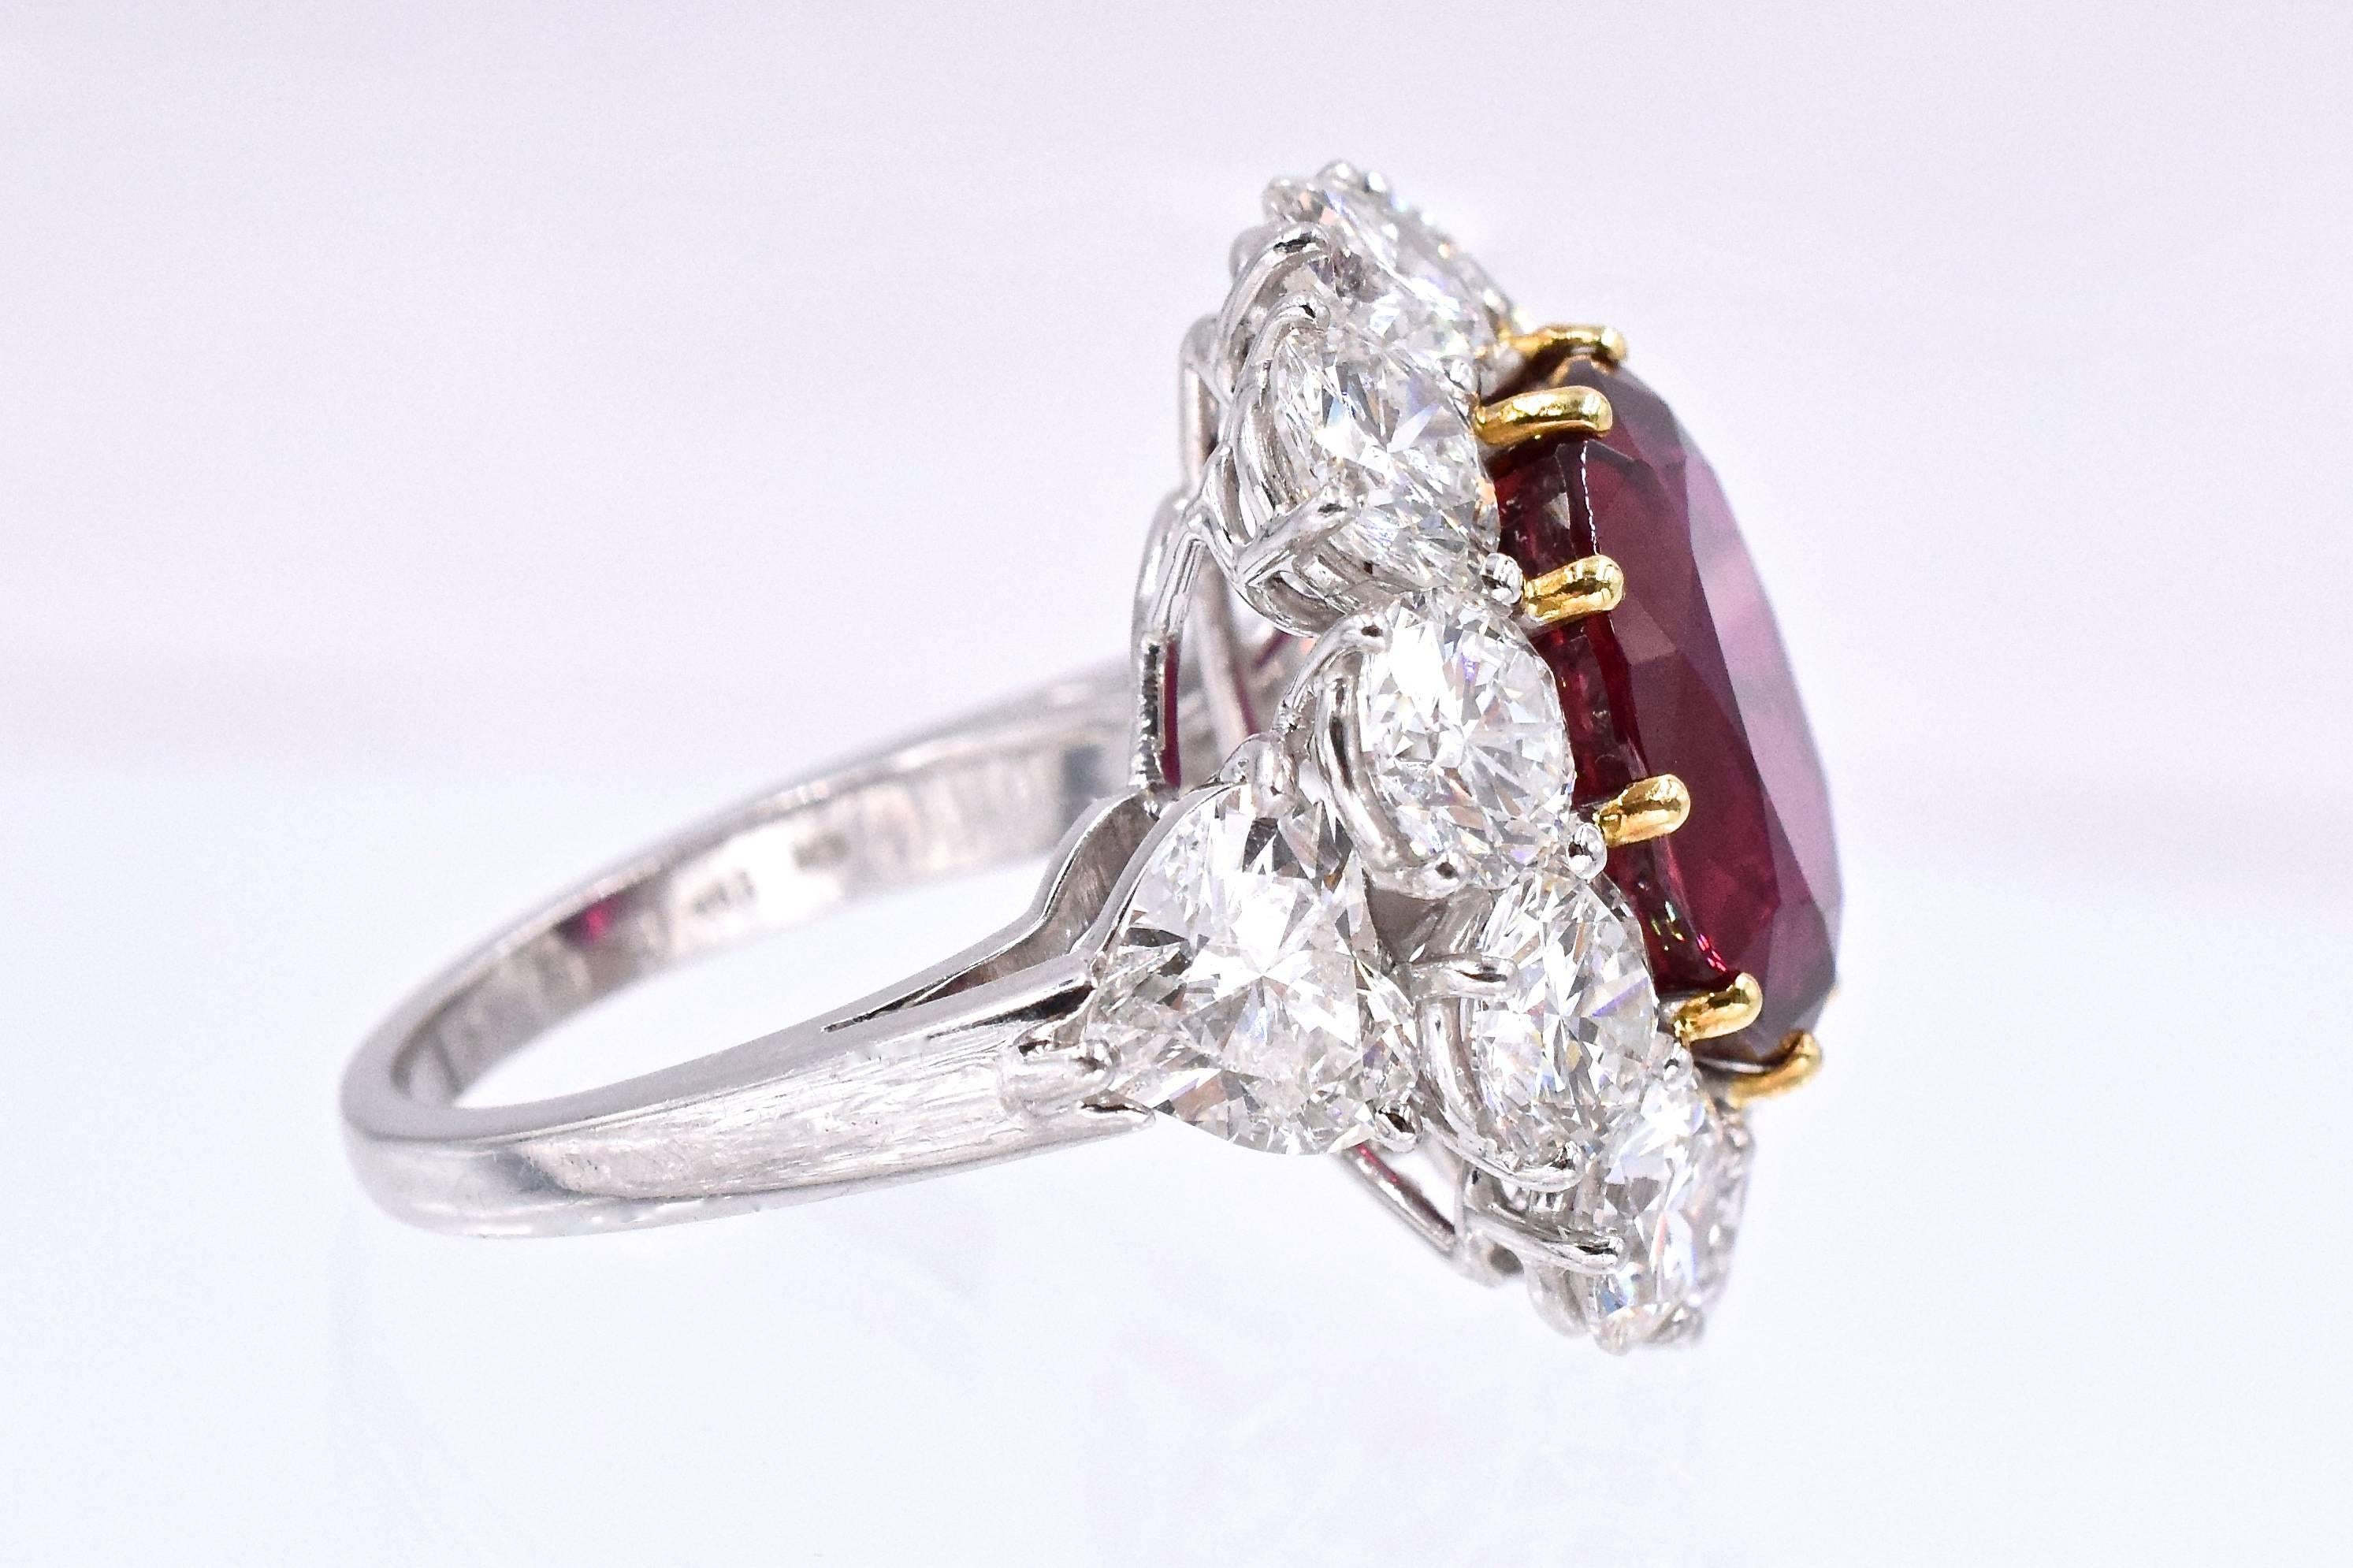 GRAFF! Ruby and diamond ring.
Center  is oval shape ruby with  weighing 9.44 carats, 
Within a frame of 10 round brilliant-cut diamonds and highlighted with two  heart-shaped diamonds on the shoulders. 
Total weight of diamonds approximately